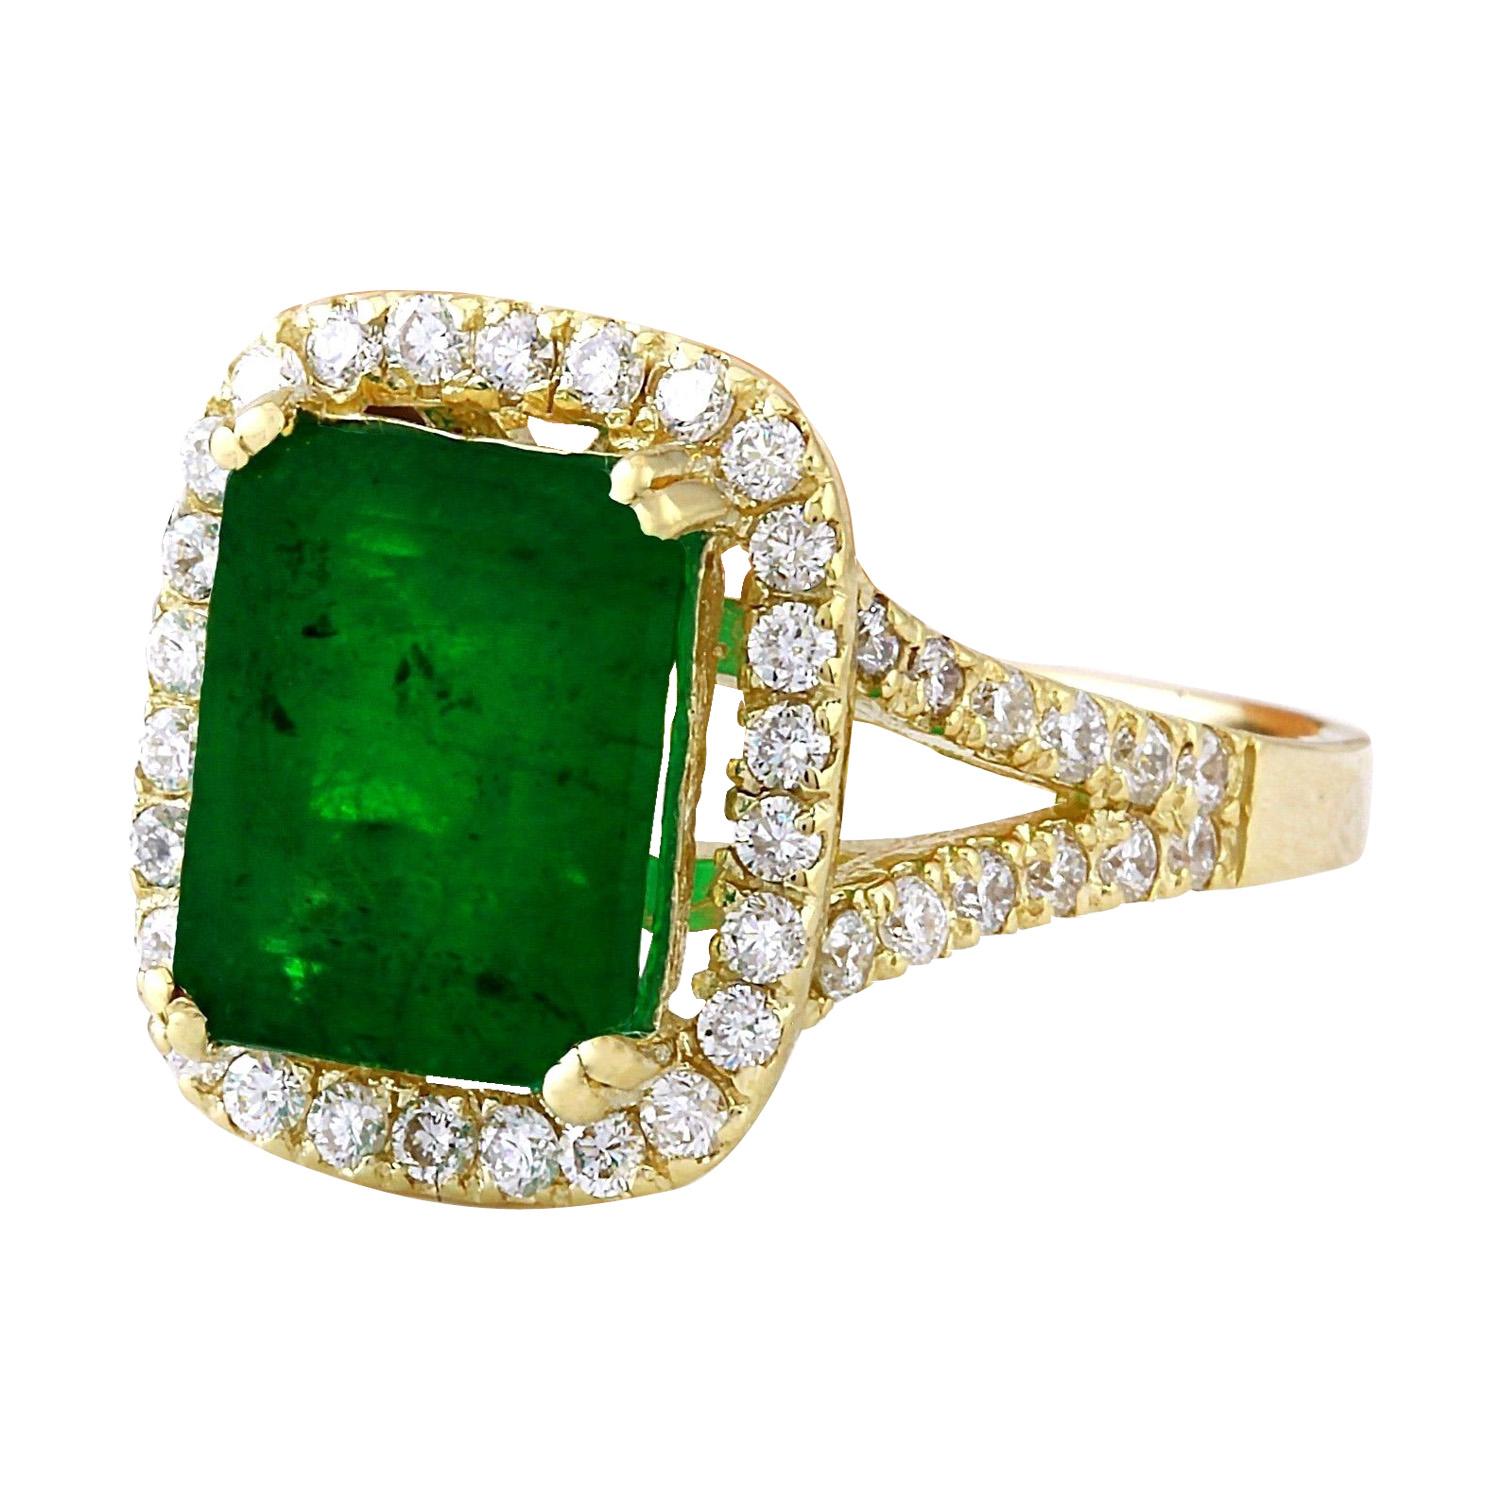 4.47 Carat Natural Emerald 14K Solid Yellow Gold Diamond Ring
 Item Type: Ring
 Item Style: Engagement
 Material: 14K Yellow Gold
 Mainstone: Emerald
 Stone Color: Green
 Stone Weight: 3.79 Carat
 Stone Shape: Emerald
 Stone Quantity: 1
 Stone